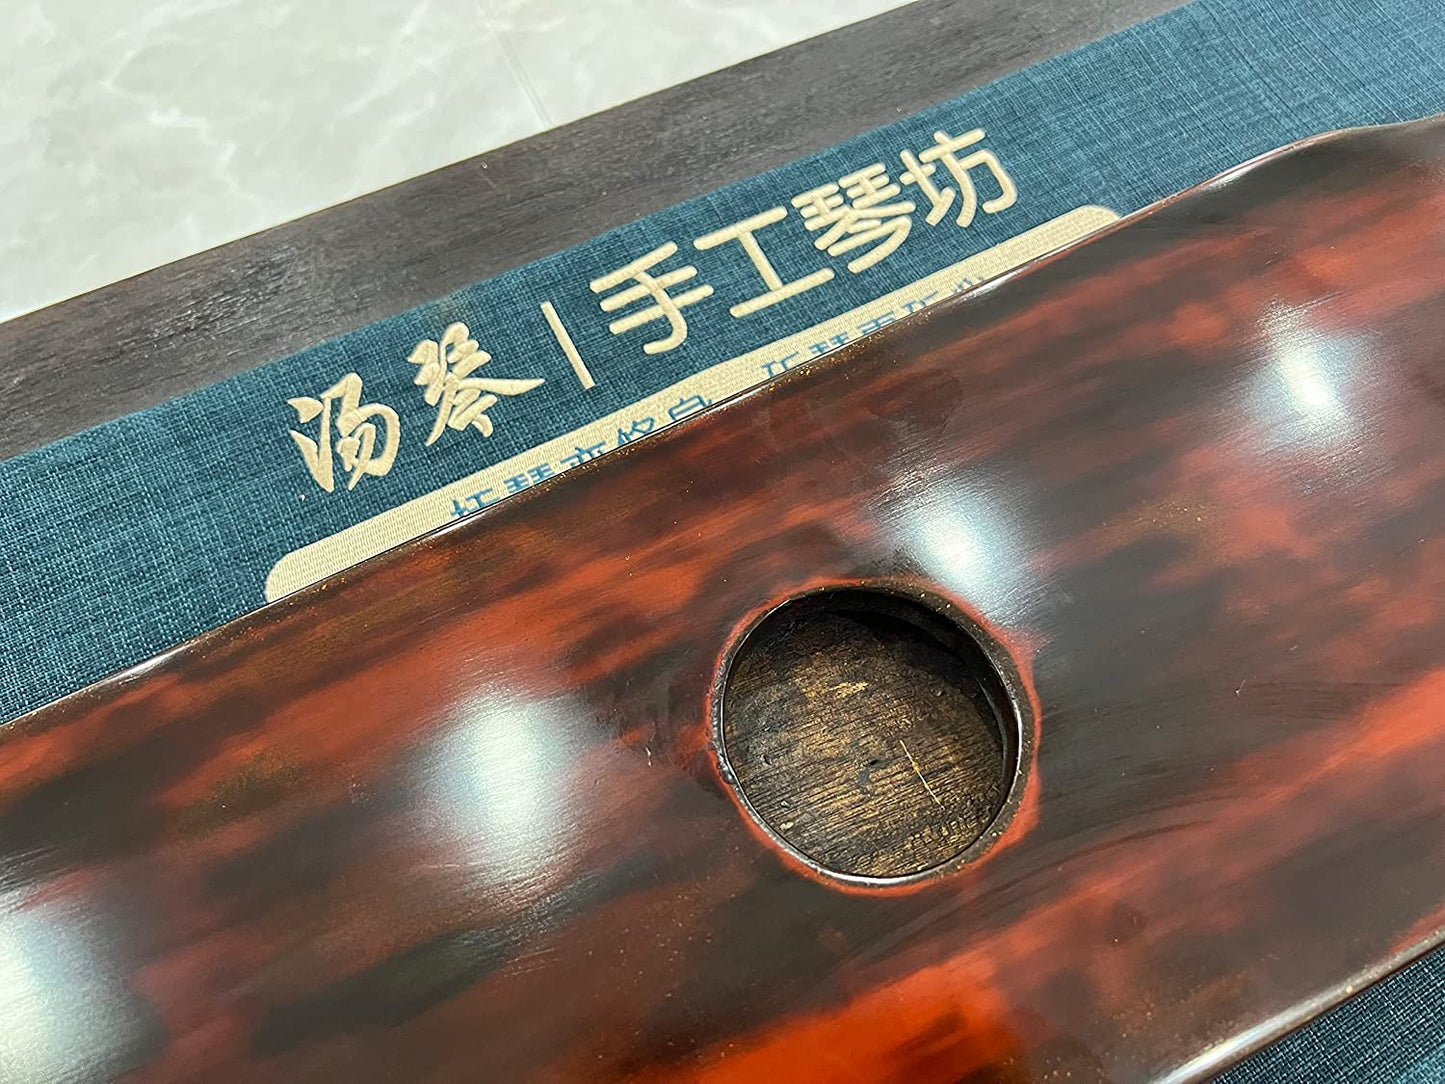 LANDTOM High Level/Concert level pure handmade Fuxi style 100 years Fir(杉木）Guqin/Chinese zither by famous master